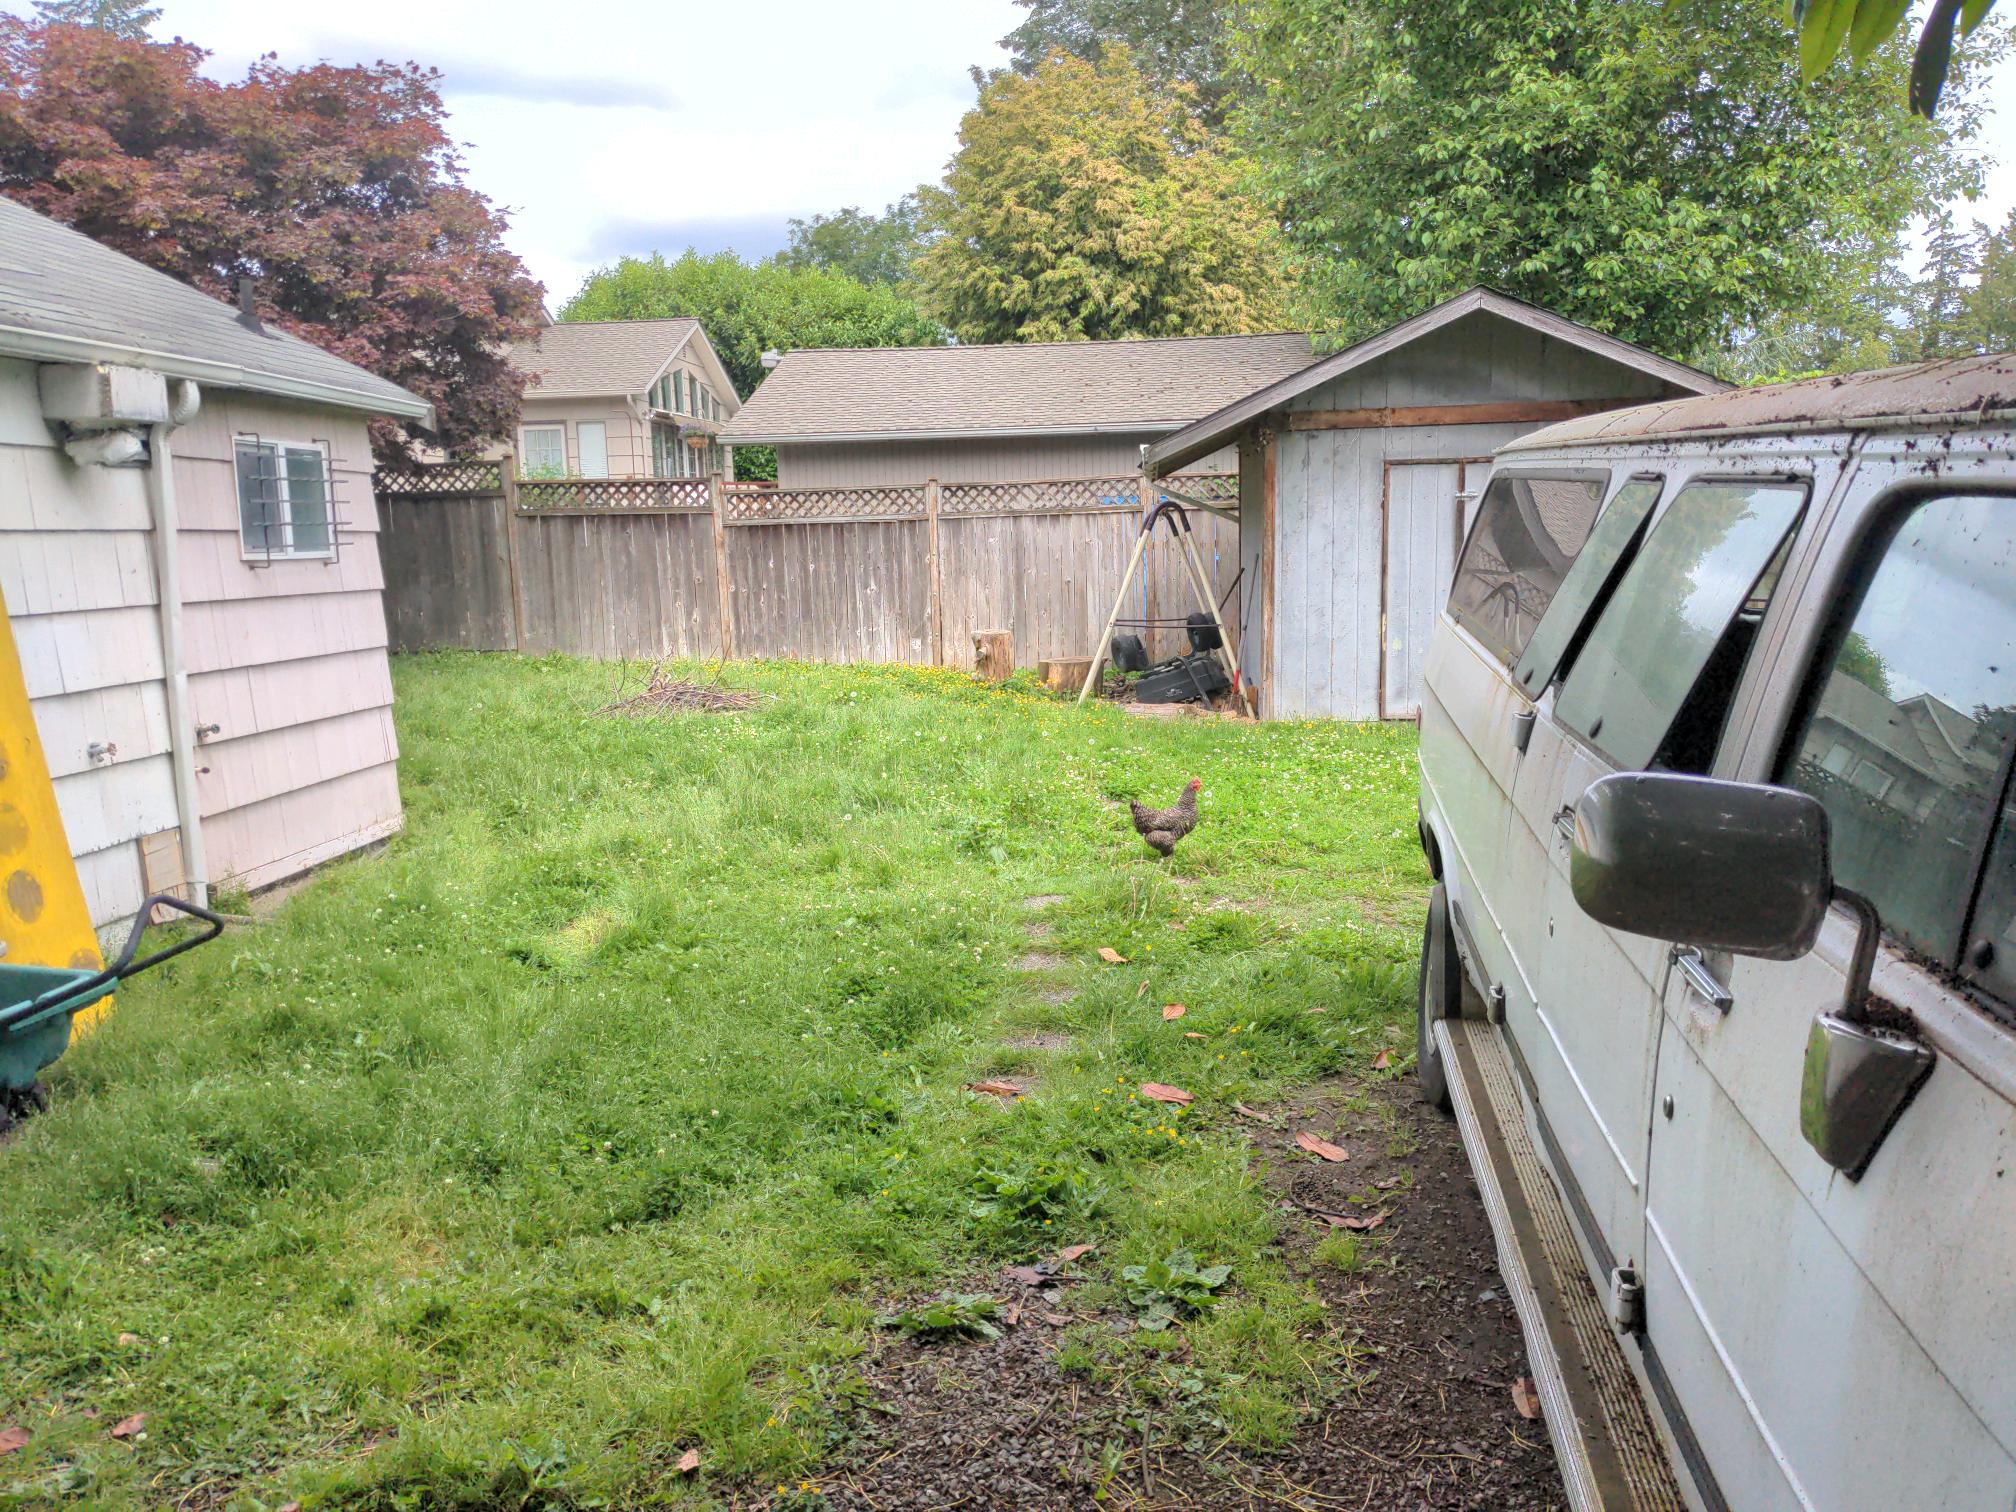 The backyard, including the blue shed (right) where Frank Bagley stored the stolen Burien pride flags.